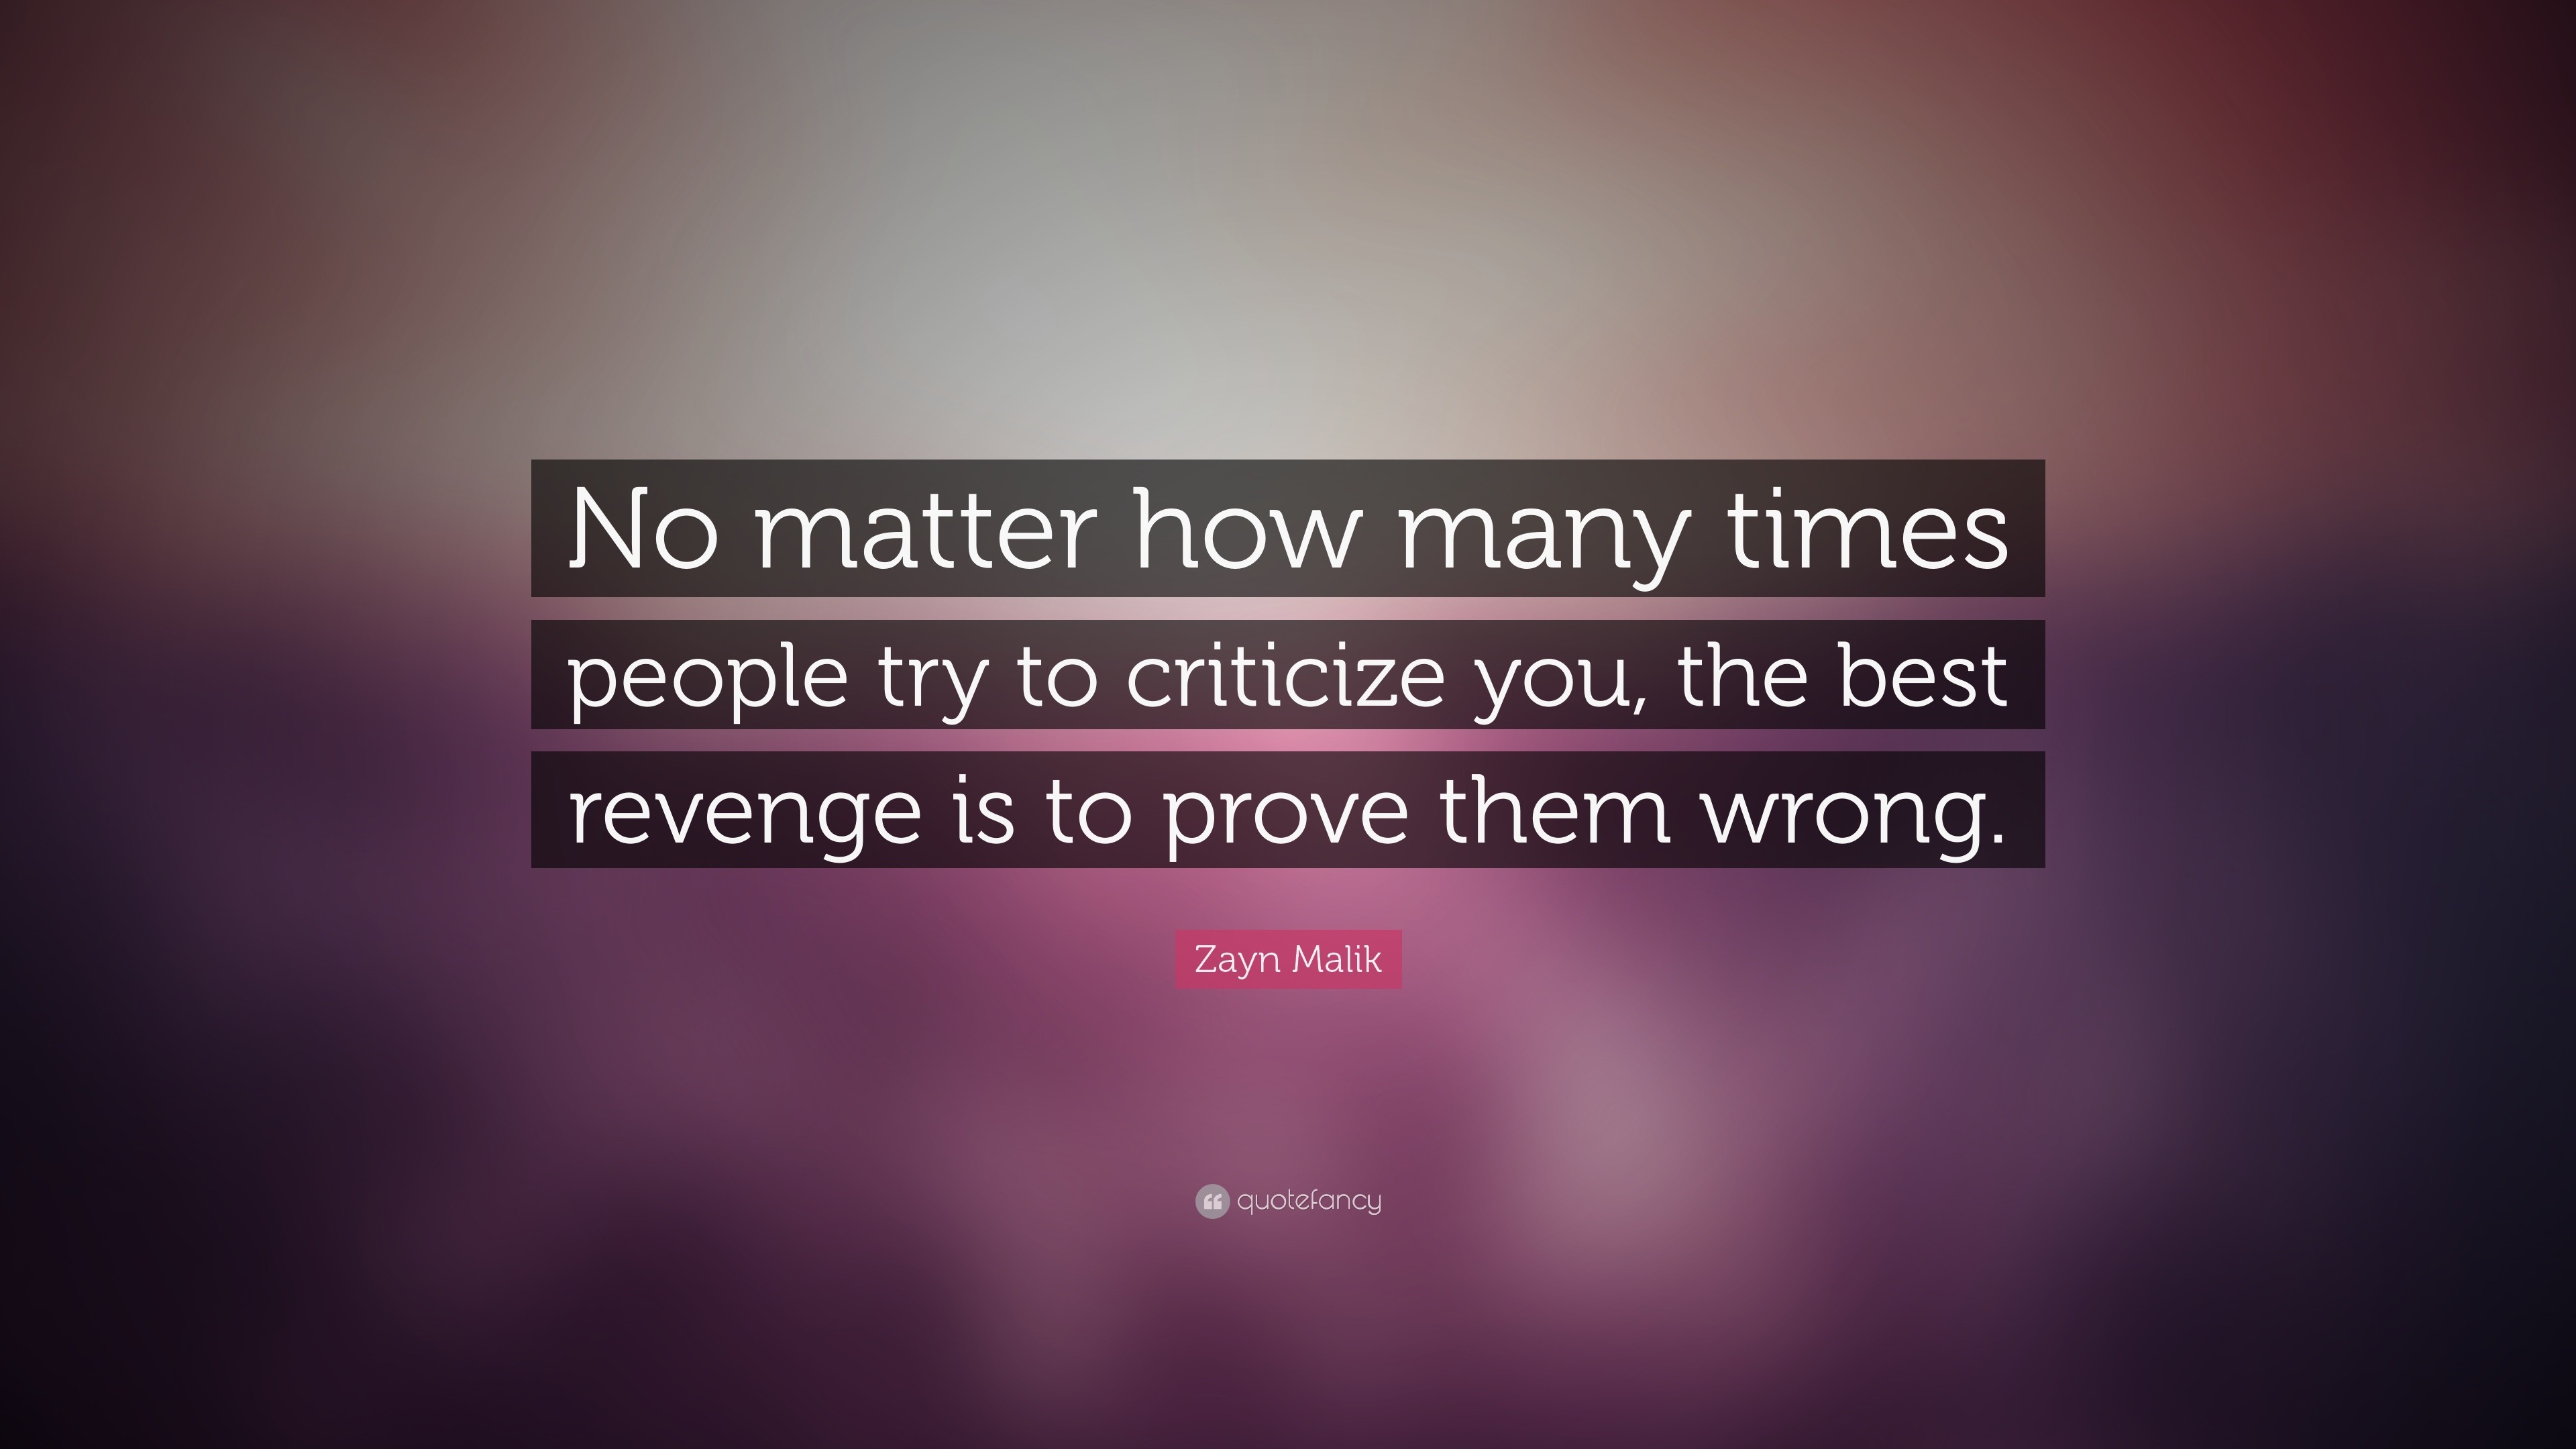 Zayn Malik Quote: “No matter how many times people try to criticize you ...